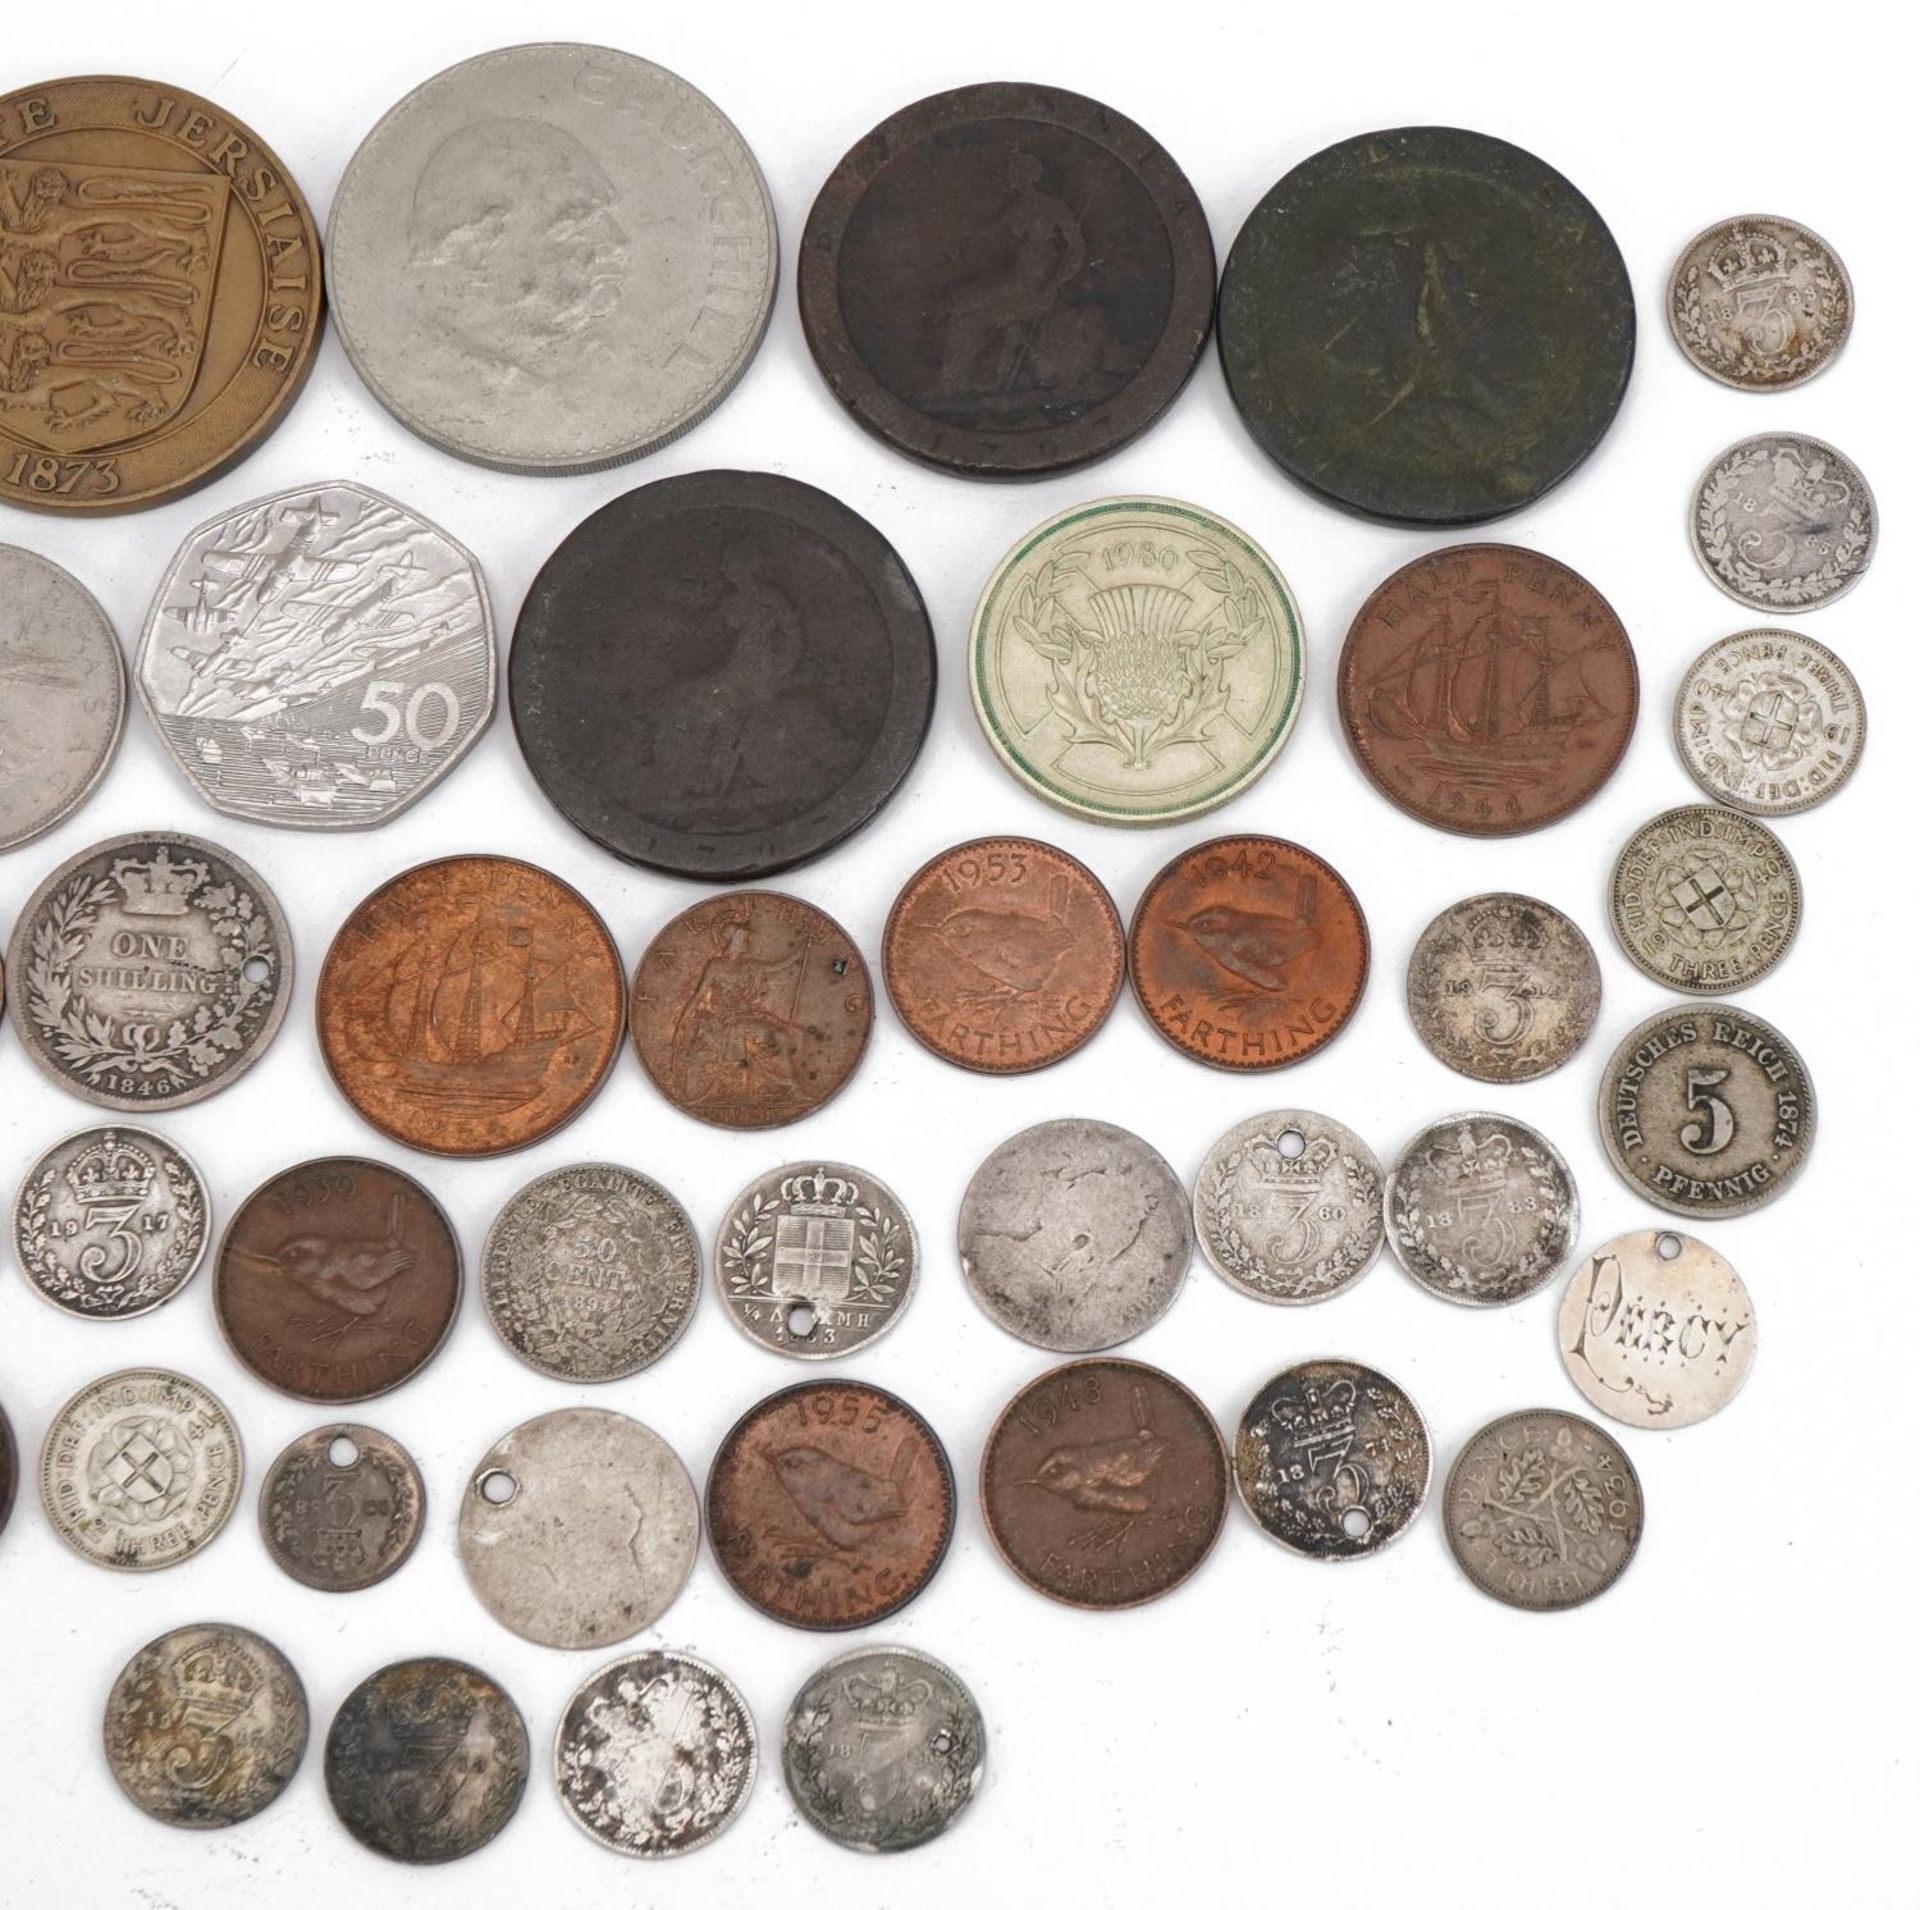 18th century and later British and world coinage, some silver, including threepenny bits and pennies - Image 3 of 8